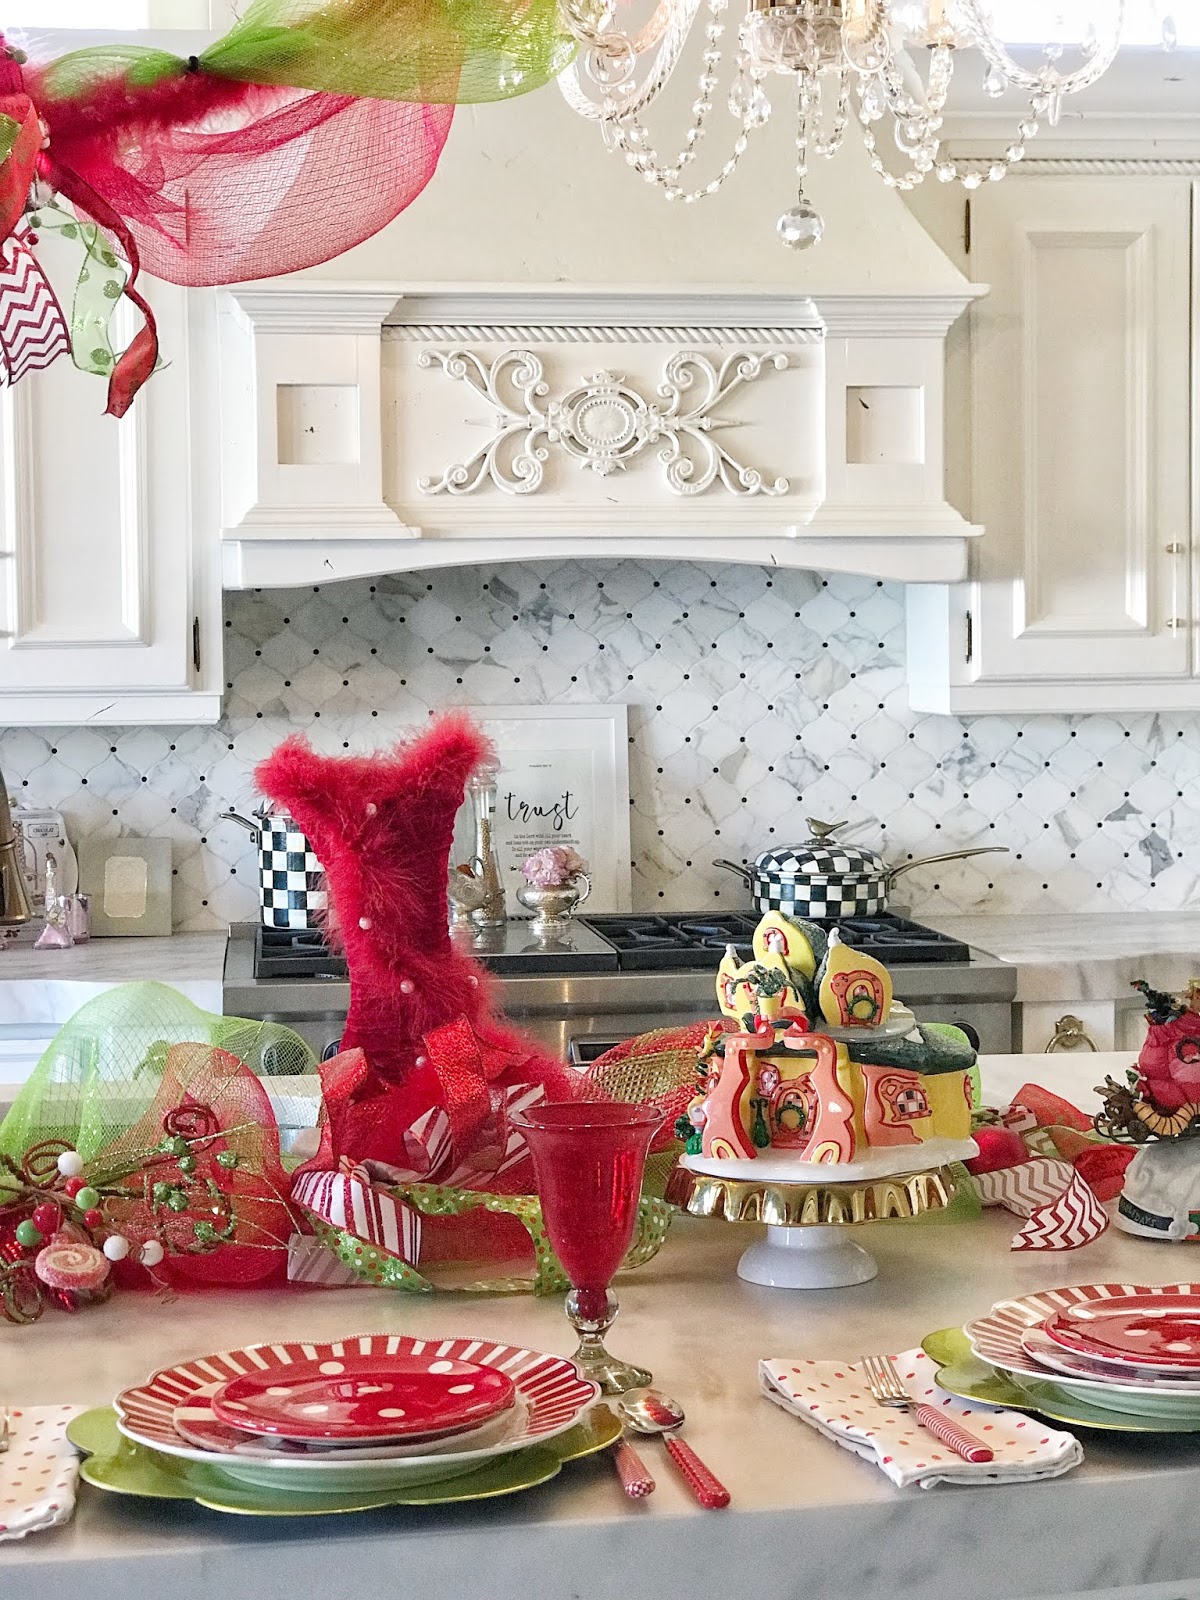 56 Christmas Table Decorating Ideas for Holiday Cheer